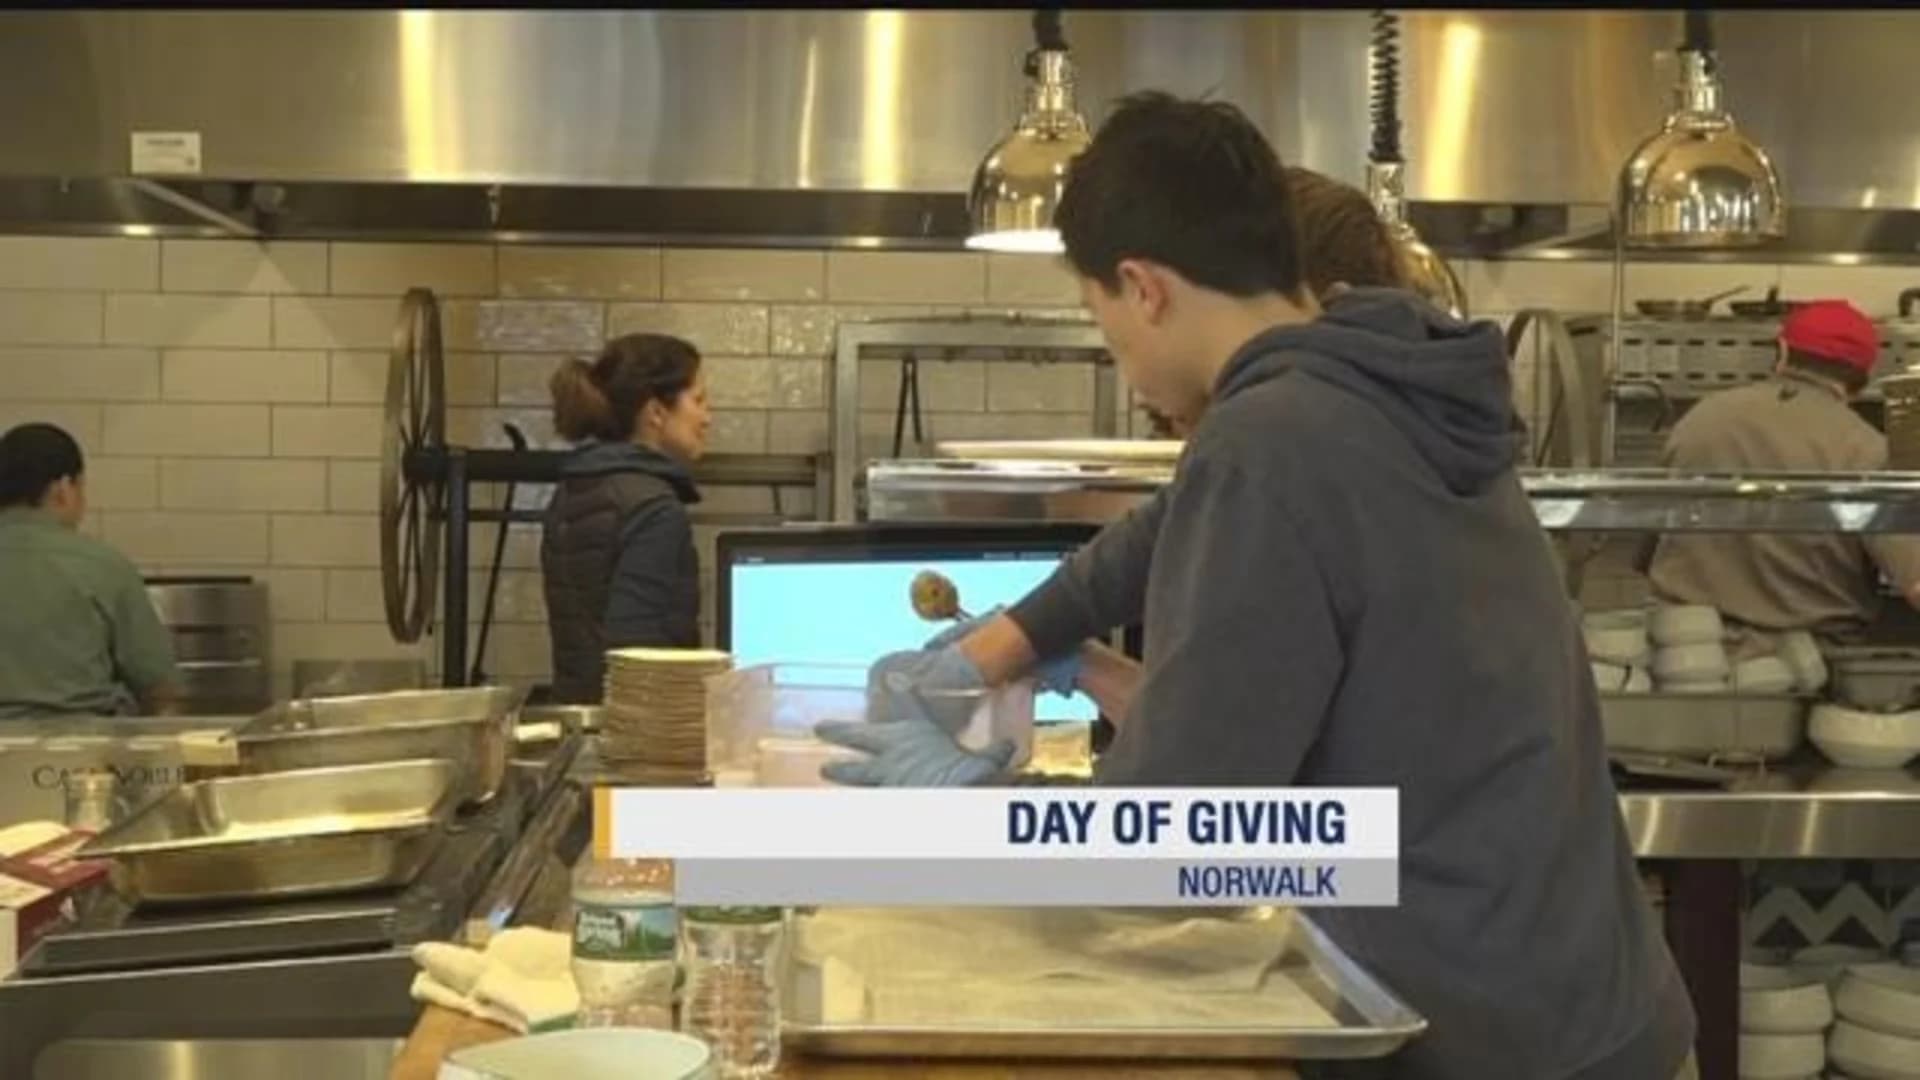 Norwalk residents prepare meals as part of Day of Giving